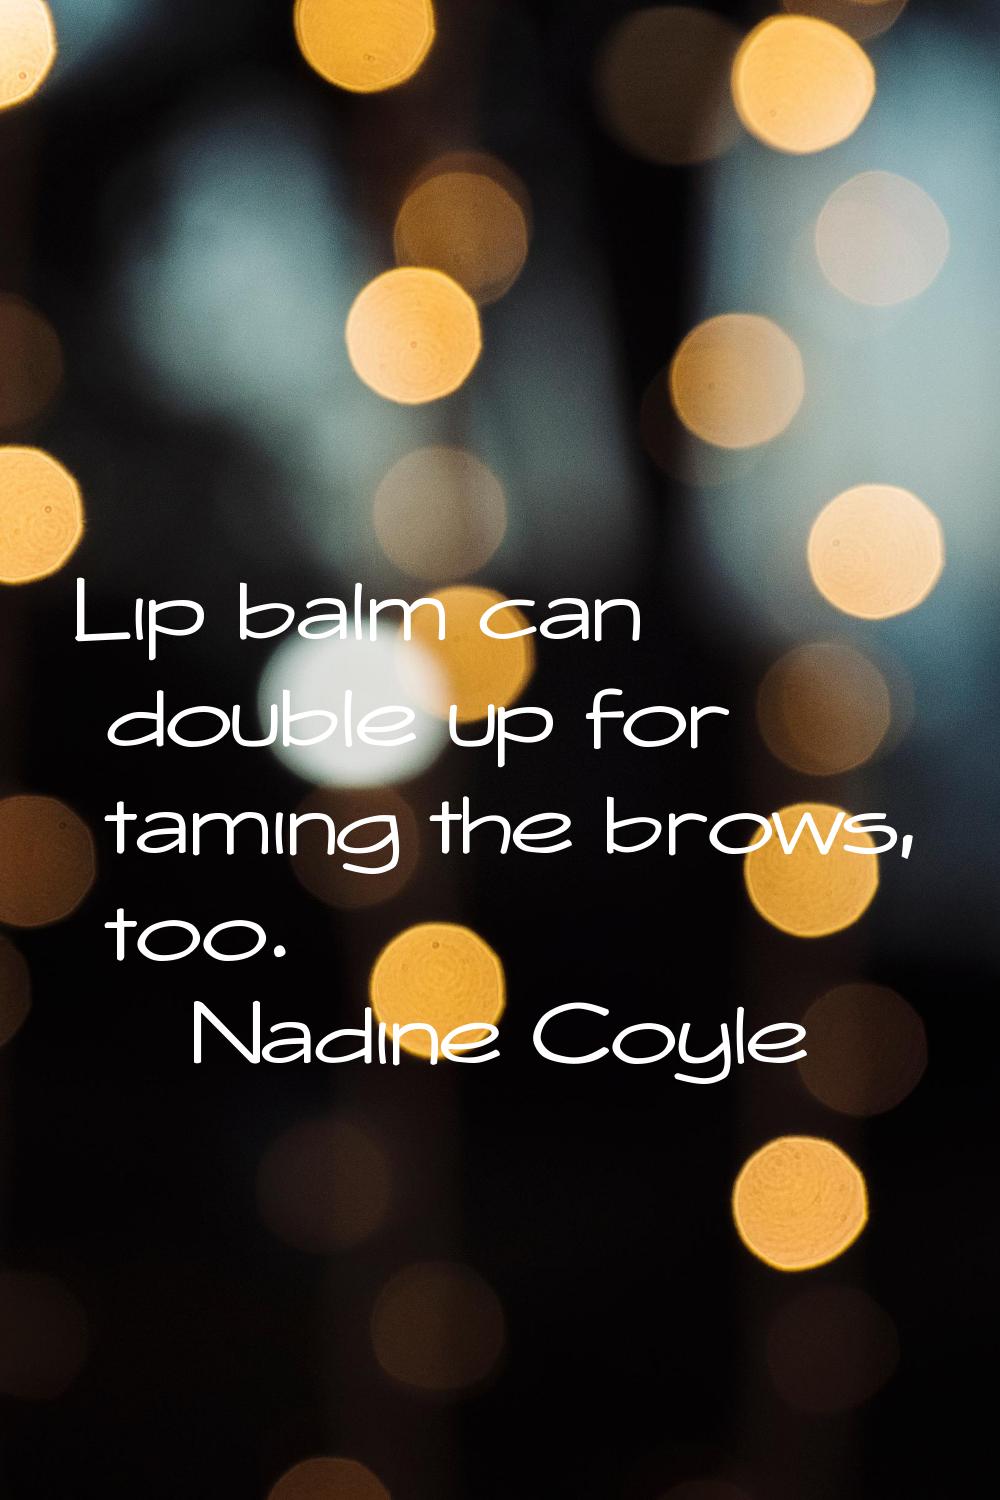 Lip balm can double up for taming the brows, too.